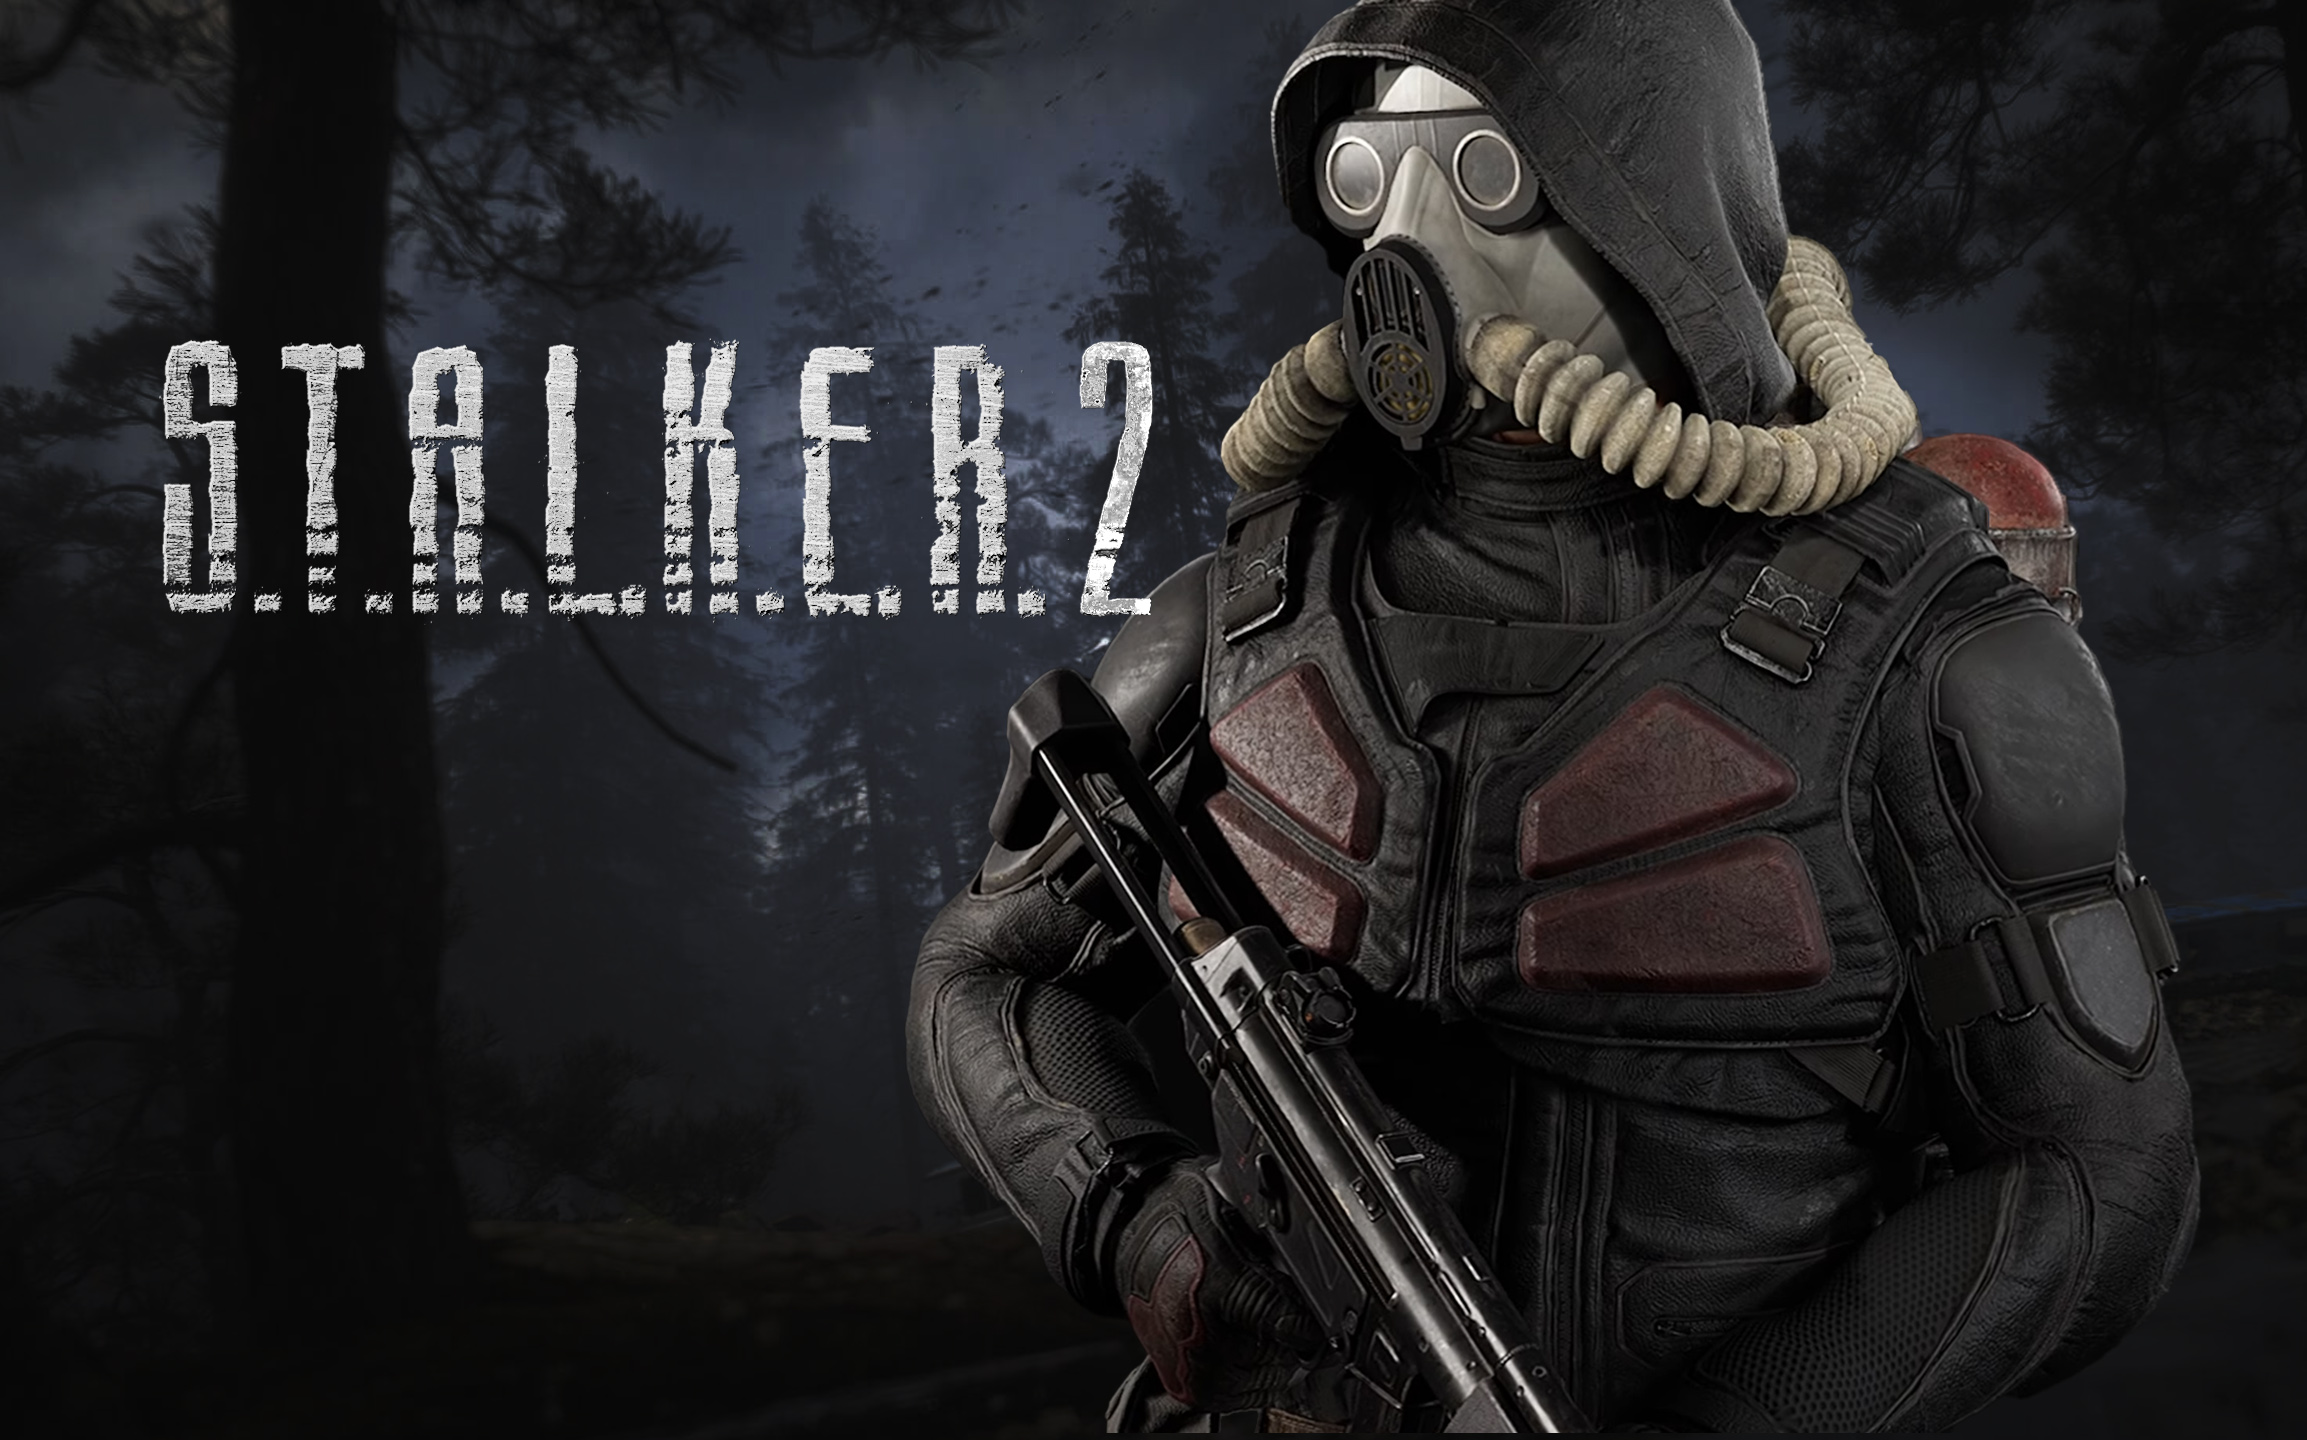 STALKER 2 Devs Present Faction Costumes, Weapons and Gap-toothed